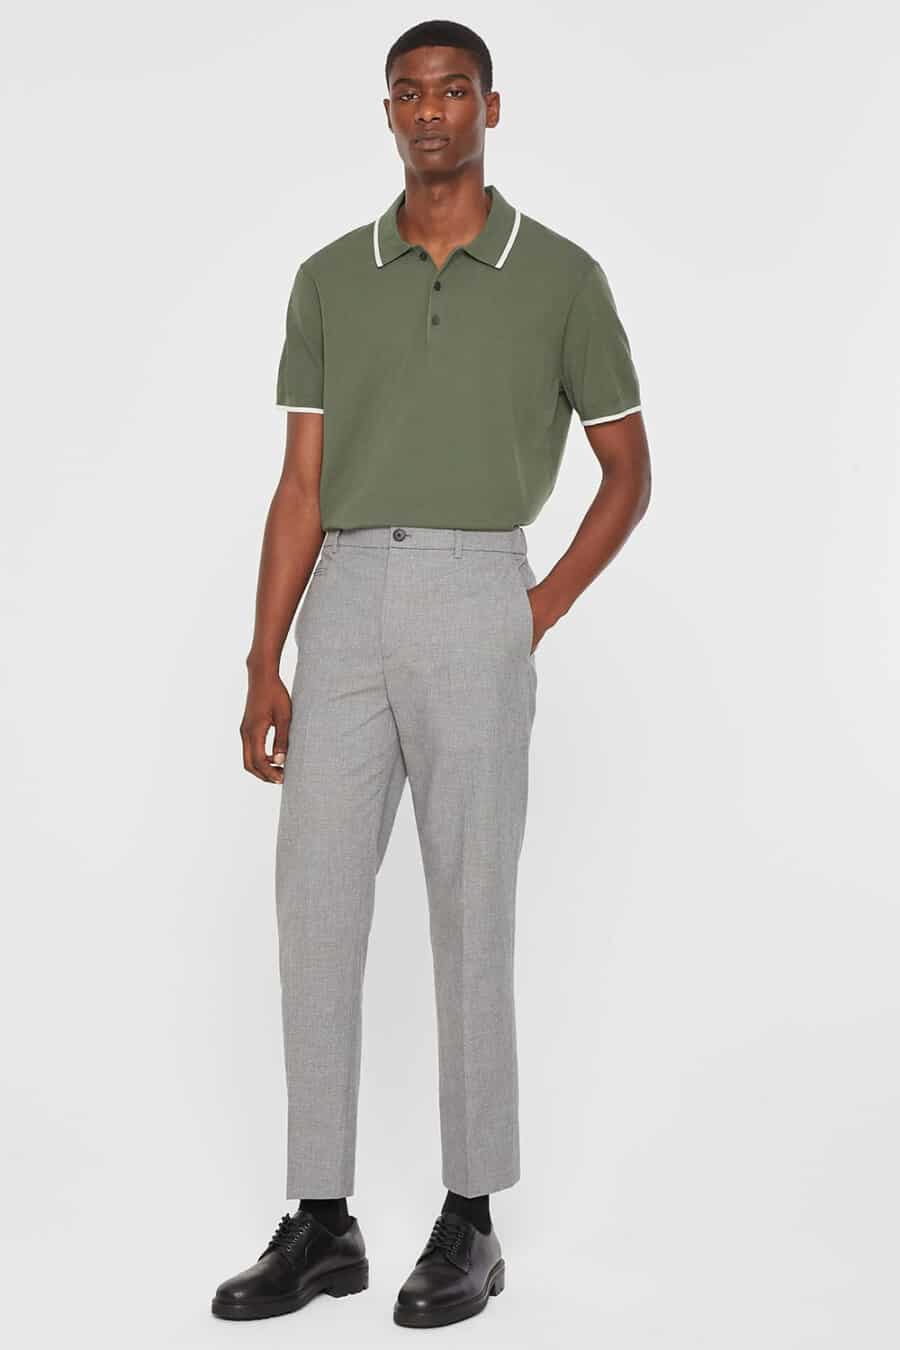 Men's cropped grey trousers, green polo shirt tucked in and black Derby shoes outfit